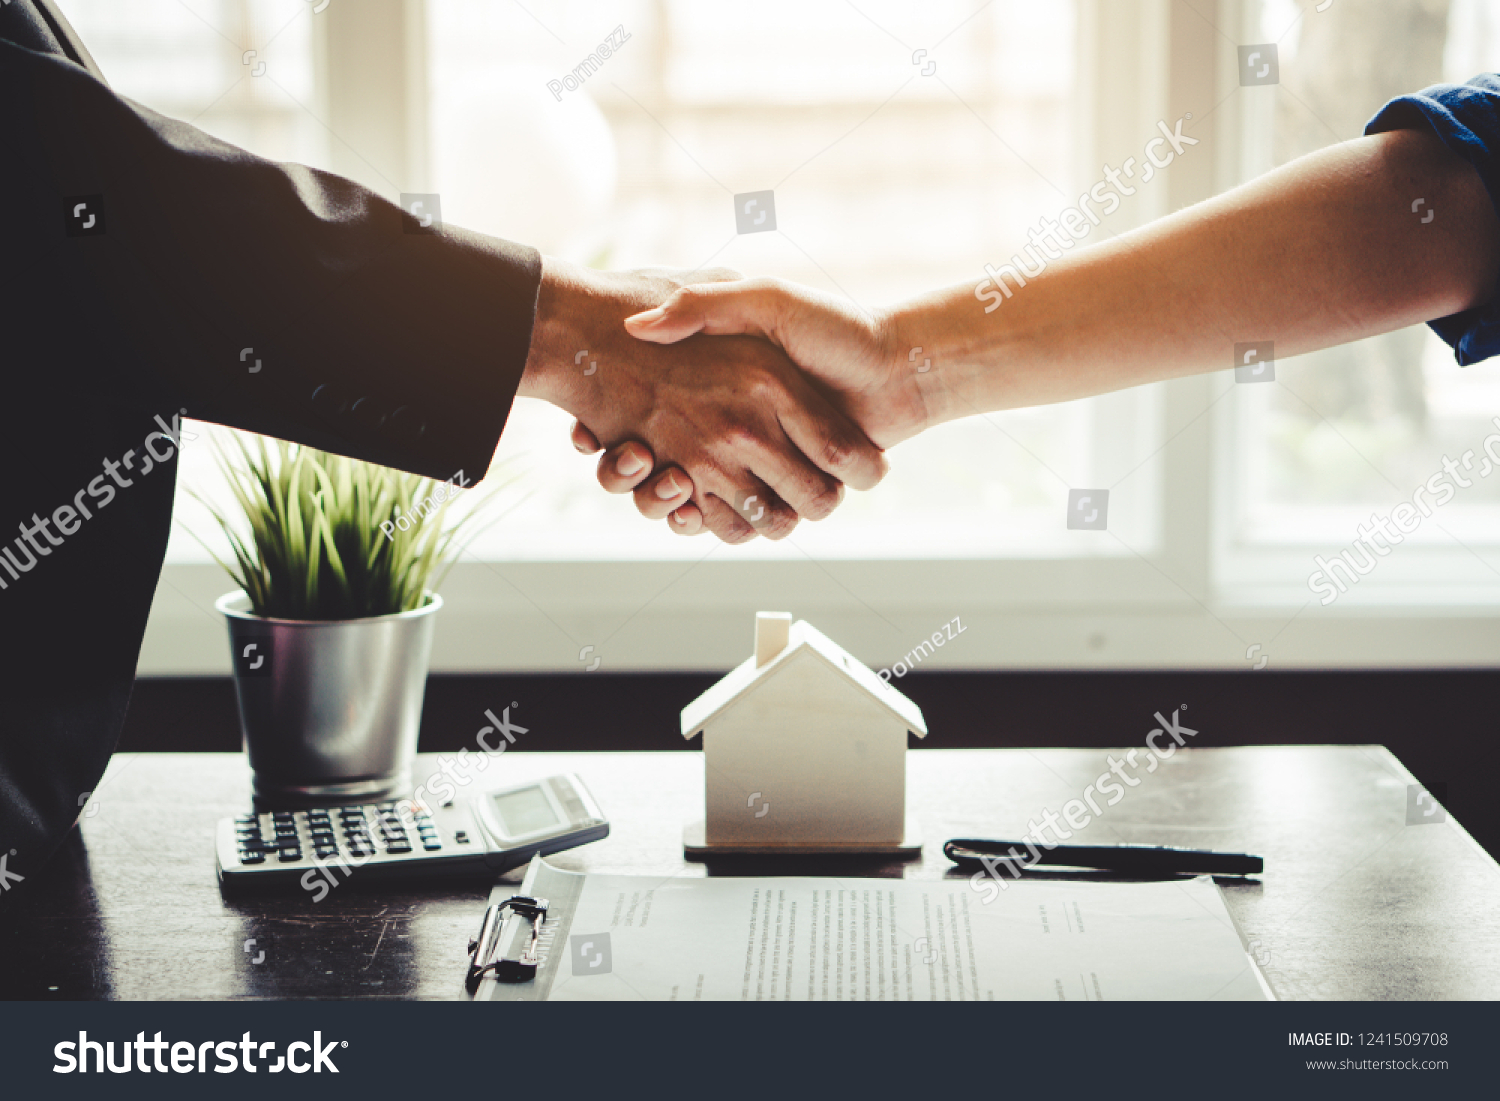 The homeowner is happy after receiving the transfer of the right to occupy the home. Agent and client shaking hands after signed document and done business deal for transfer right of property. #1241509708